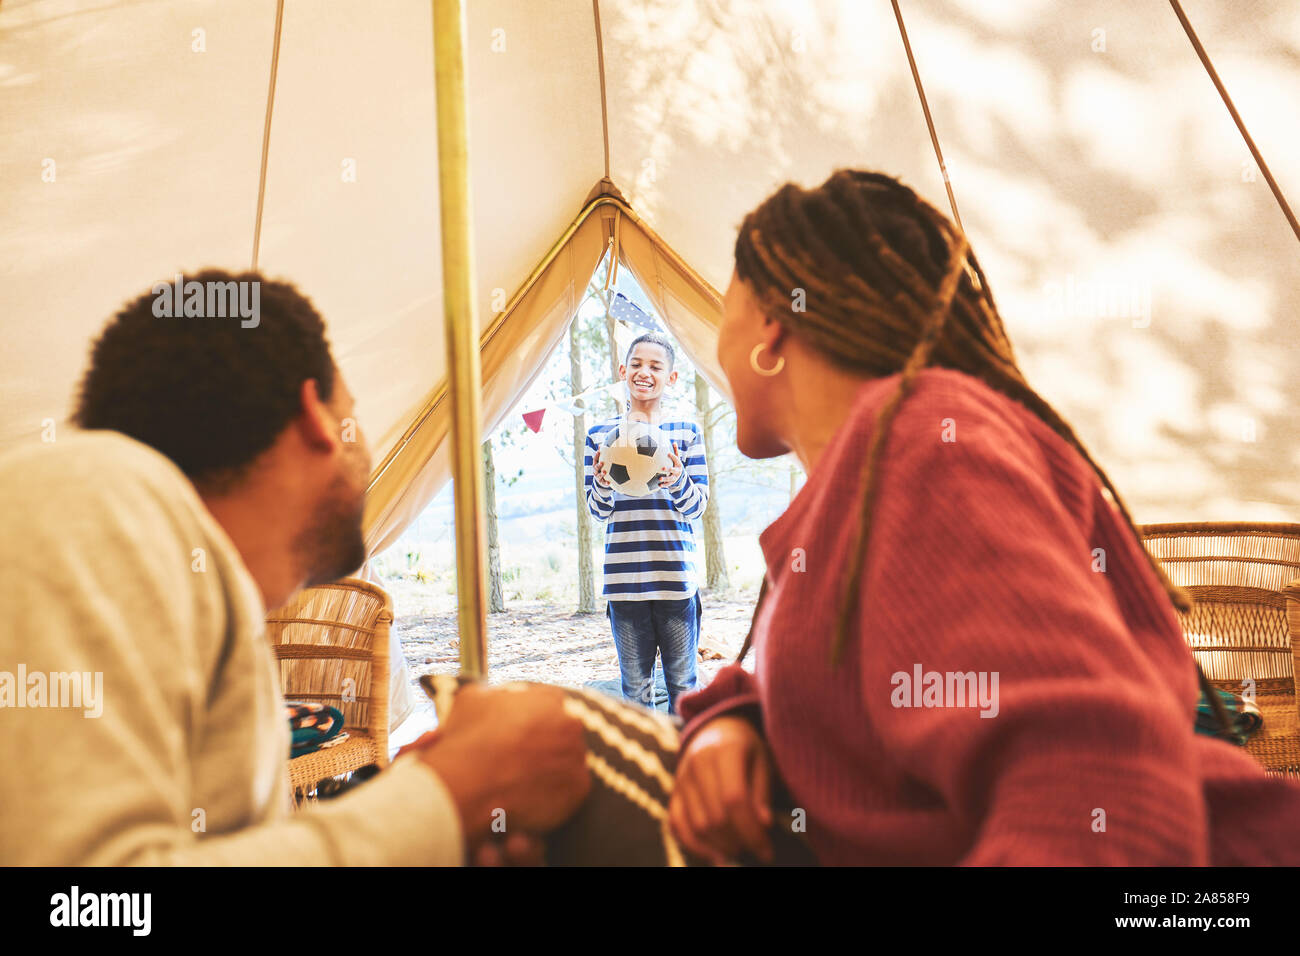 Couple watching son with soccer ball at camping yurt doorway Stock Photo